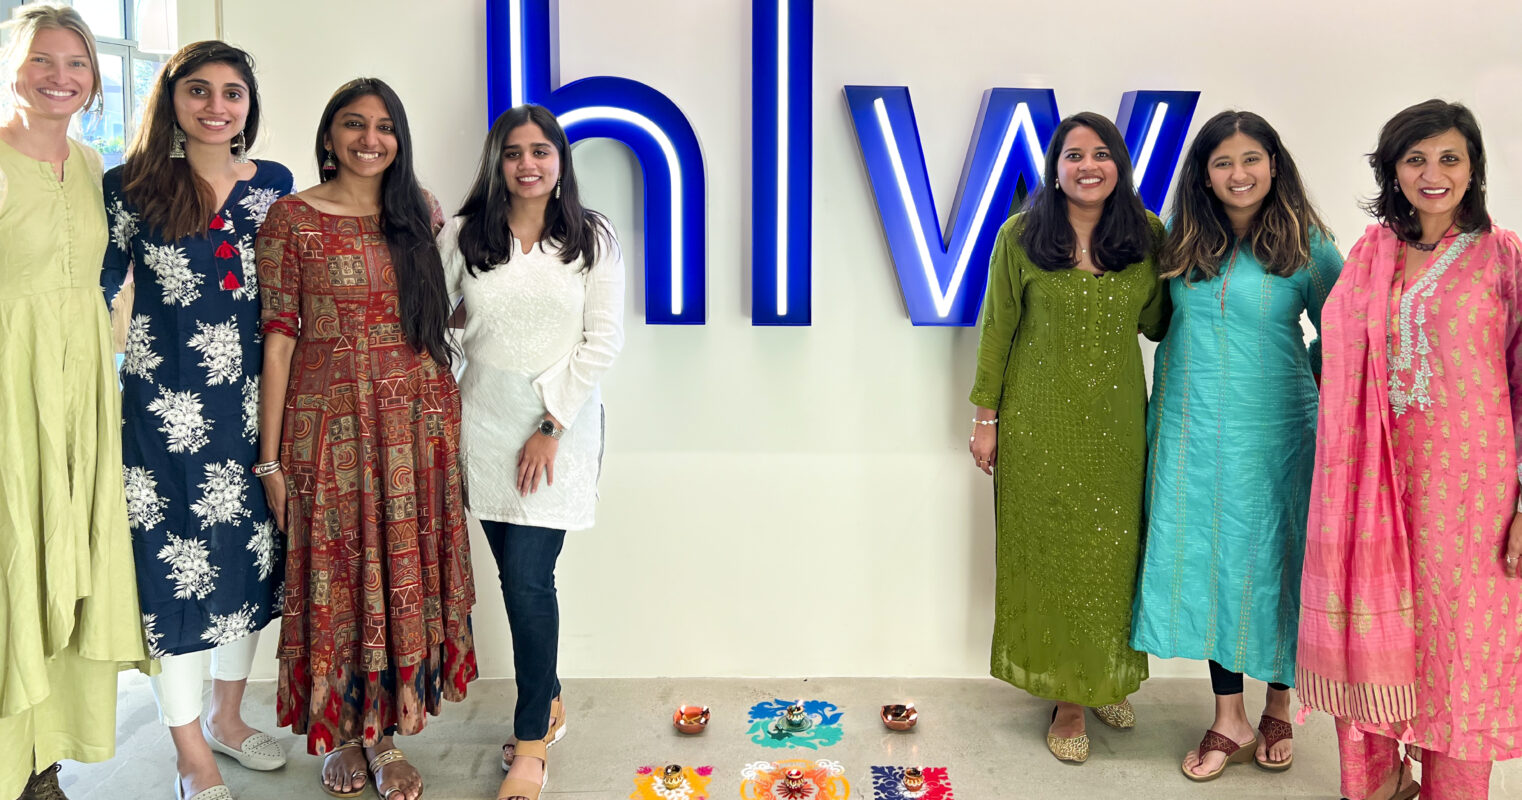 Celebrating Dwali, the festival of lights, at our Los Angeles office.